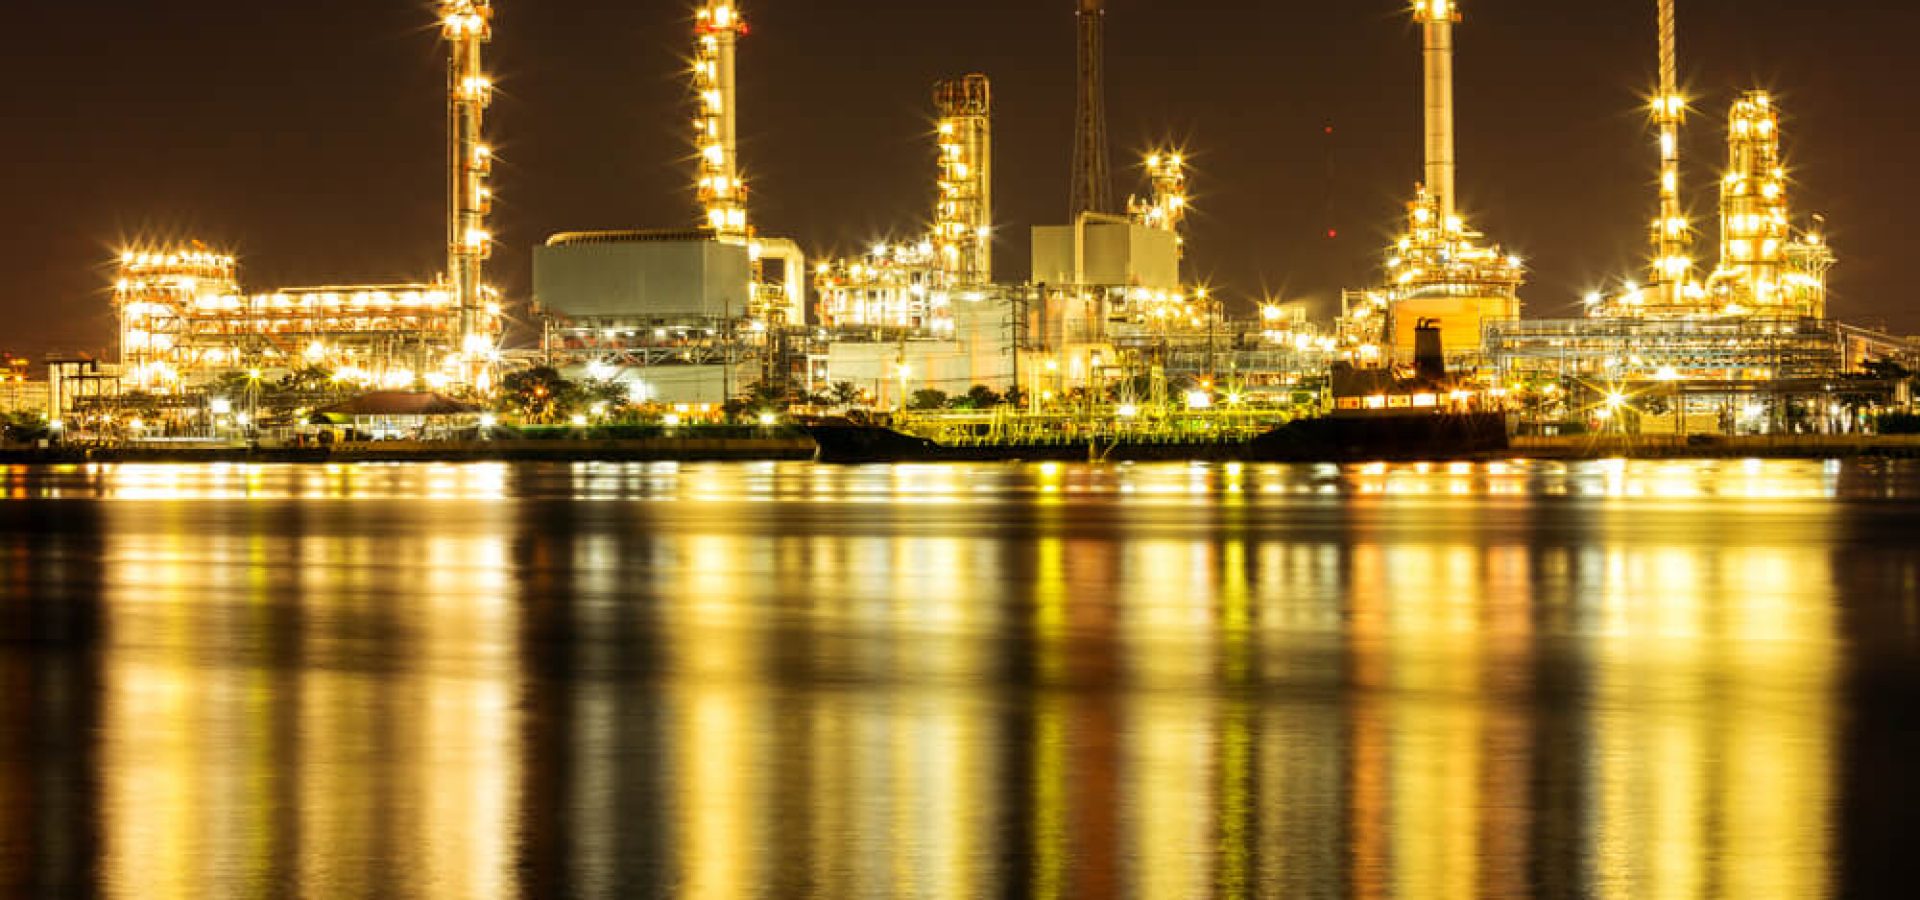 Oil Refinery Plant along river with tanker loading.